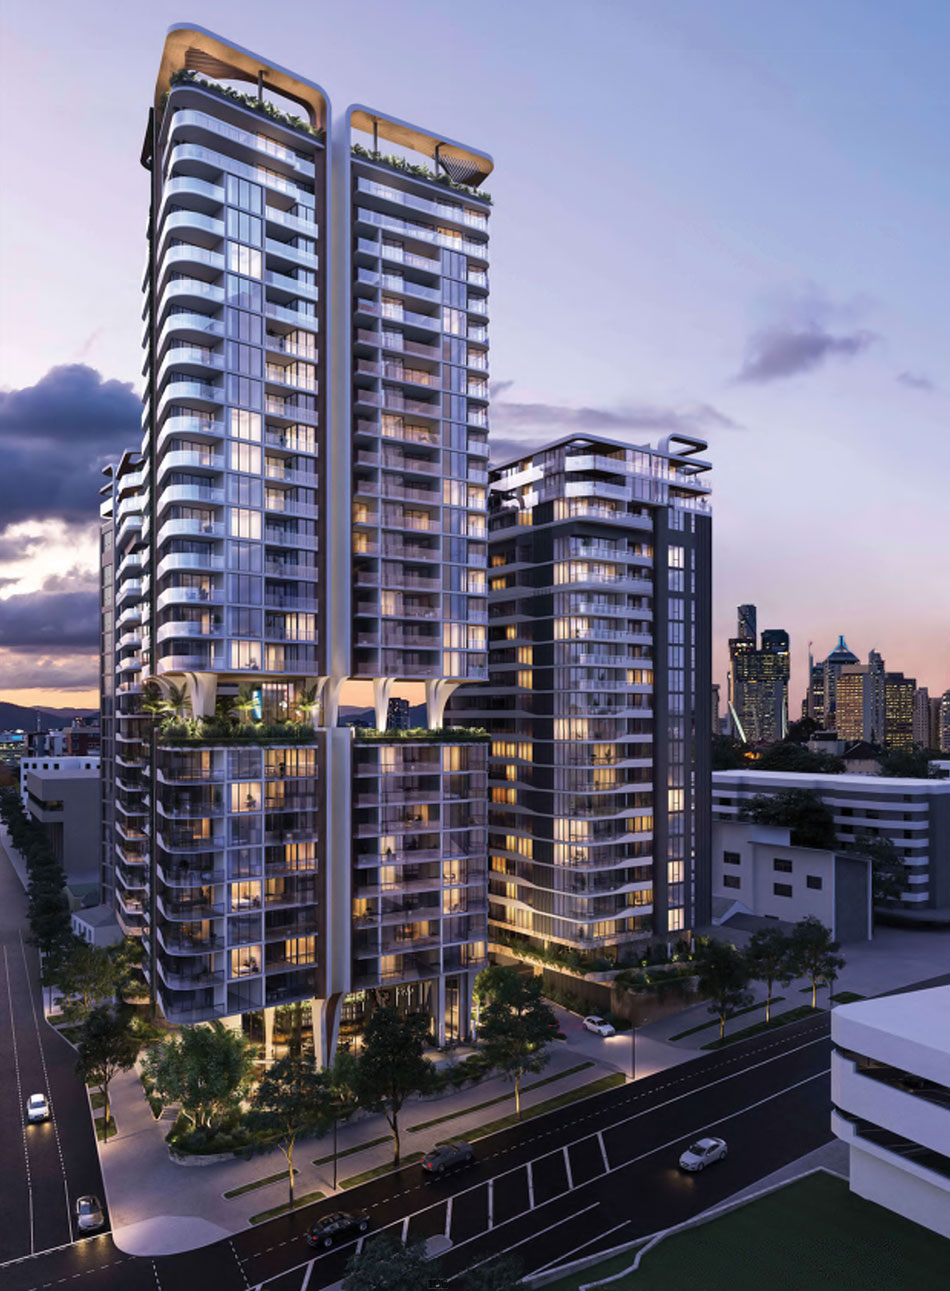 Artist's impression of proposed 'Trilogy' development at 352 Vulture Street, Kangaroo Point